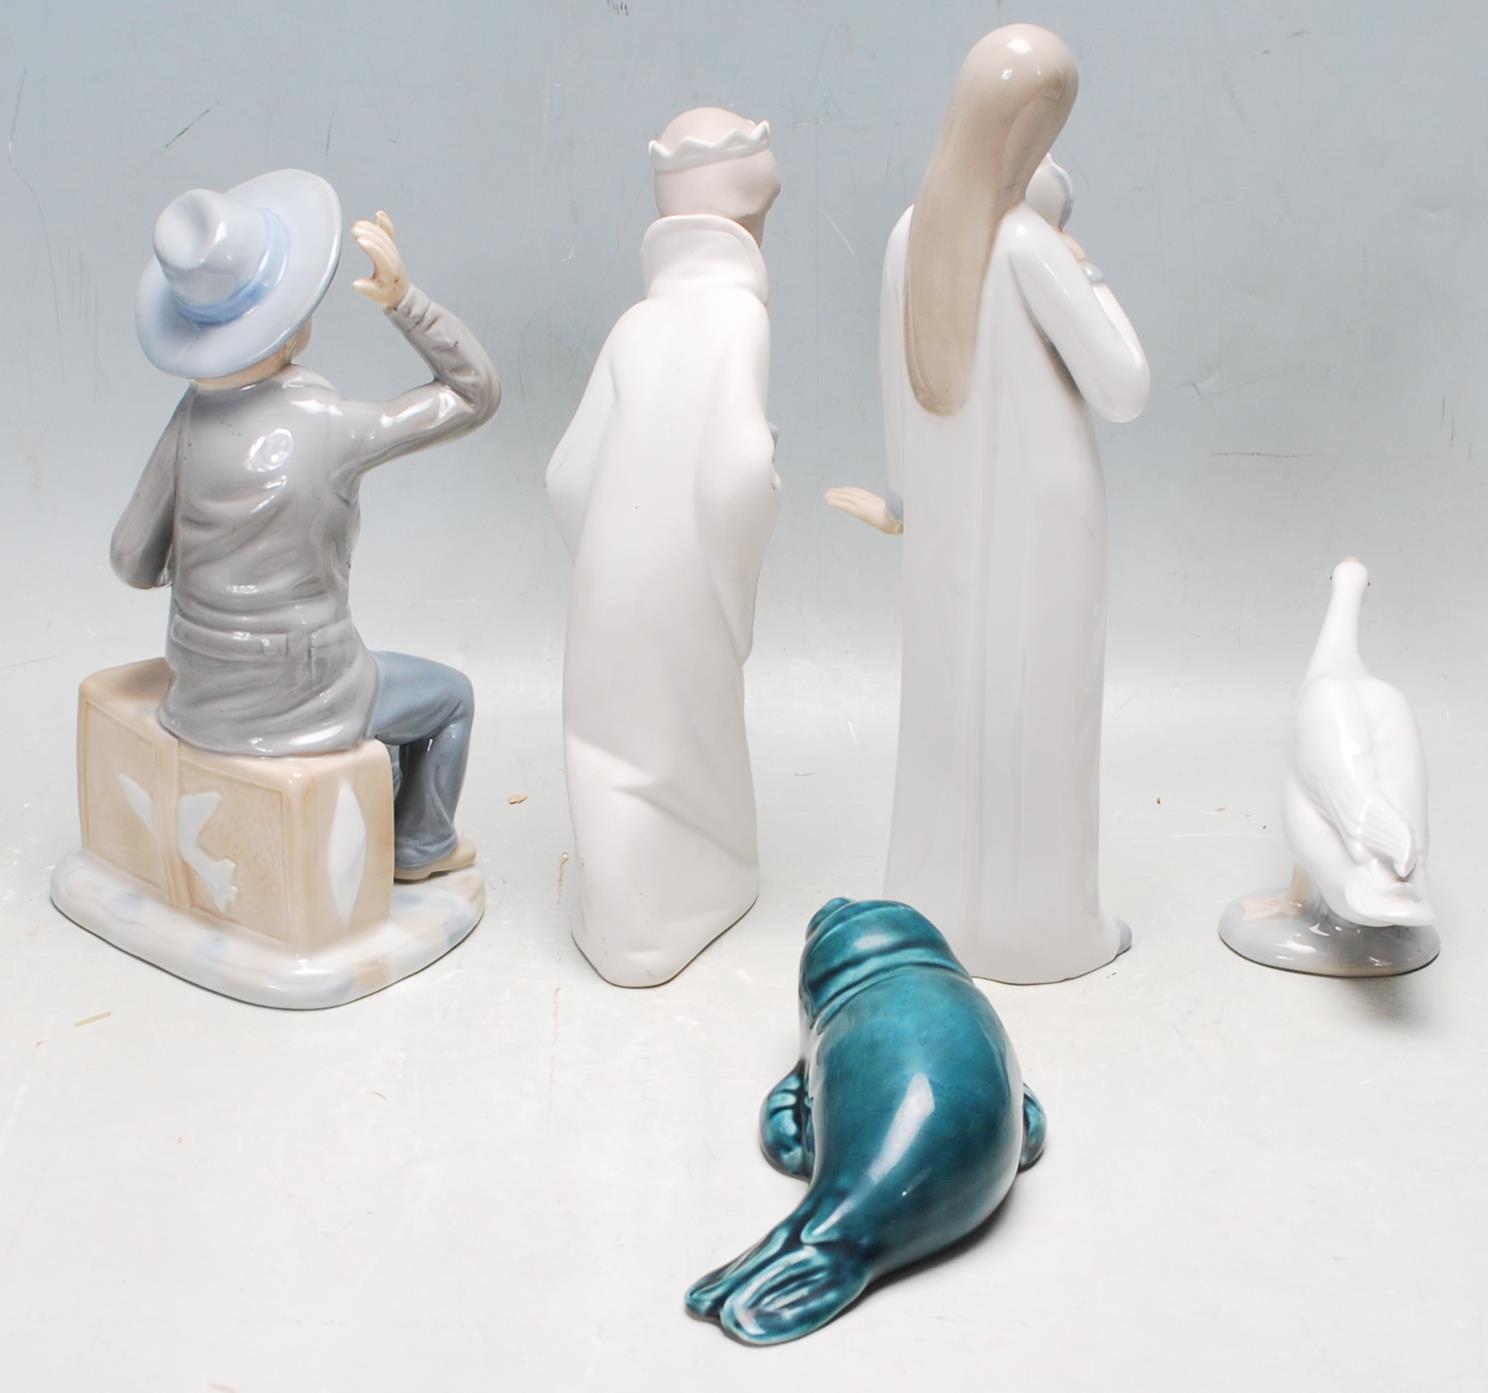 COLLECTION OF VINTAGE LATE 20TH CENTURY PORCELAIN FIGURINES BY LLADRO AND CASADES - Image 3 of 7